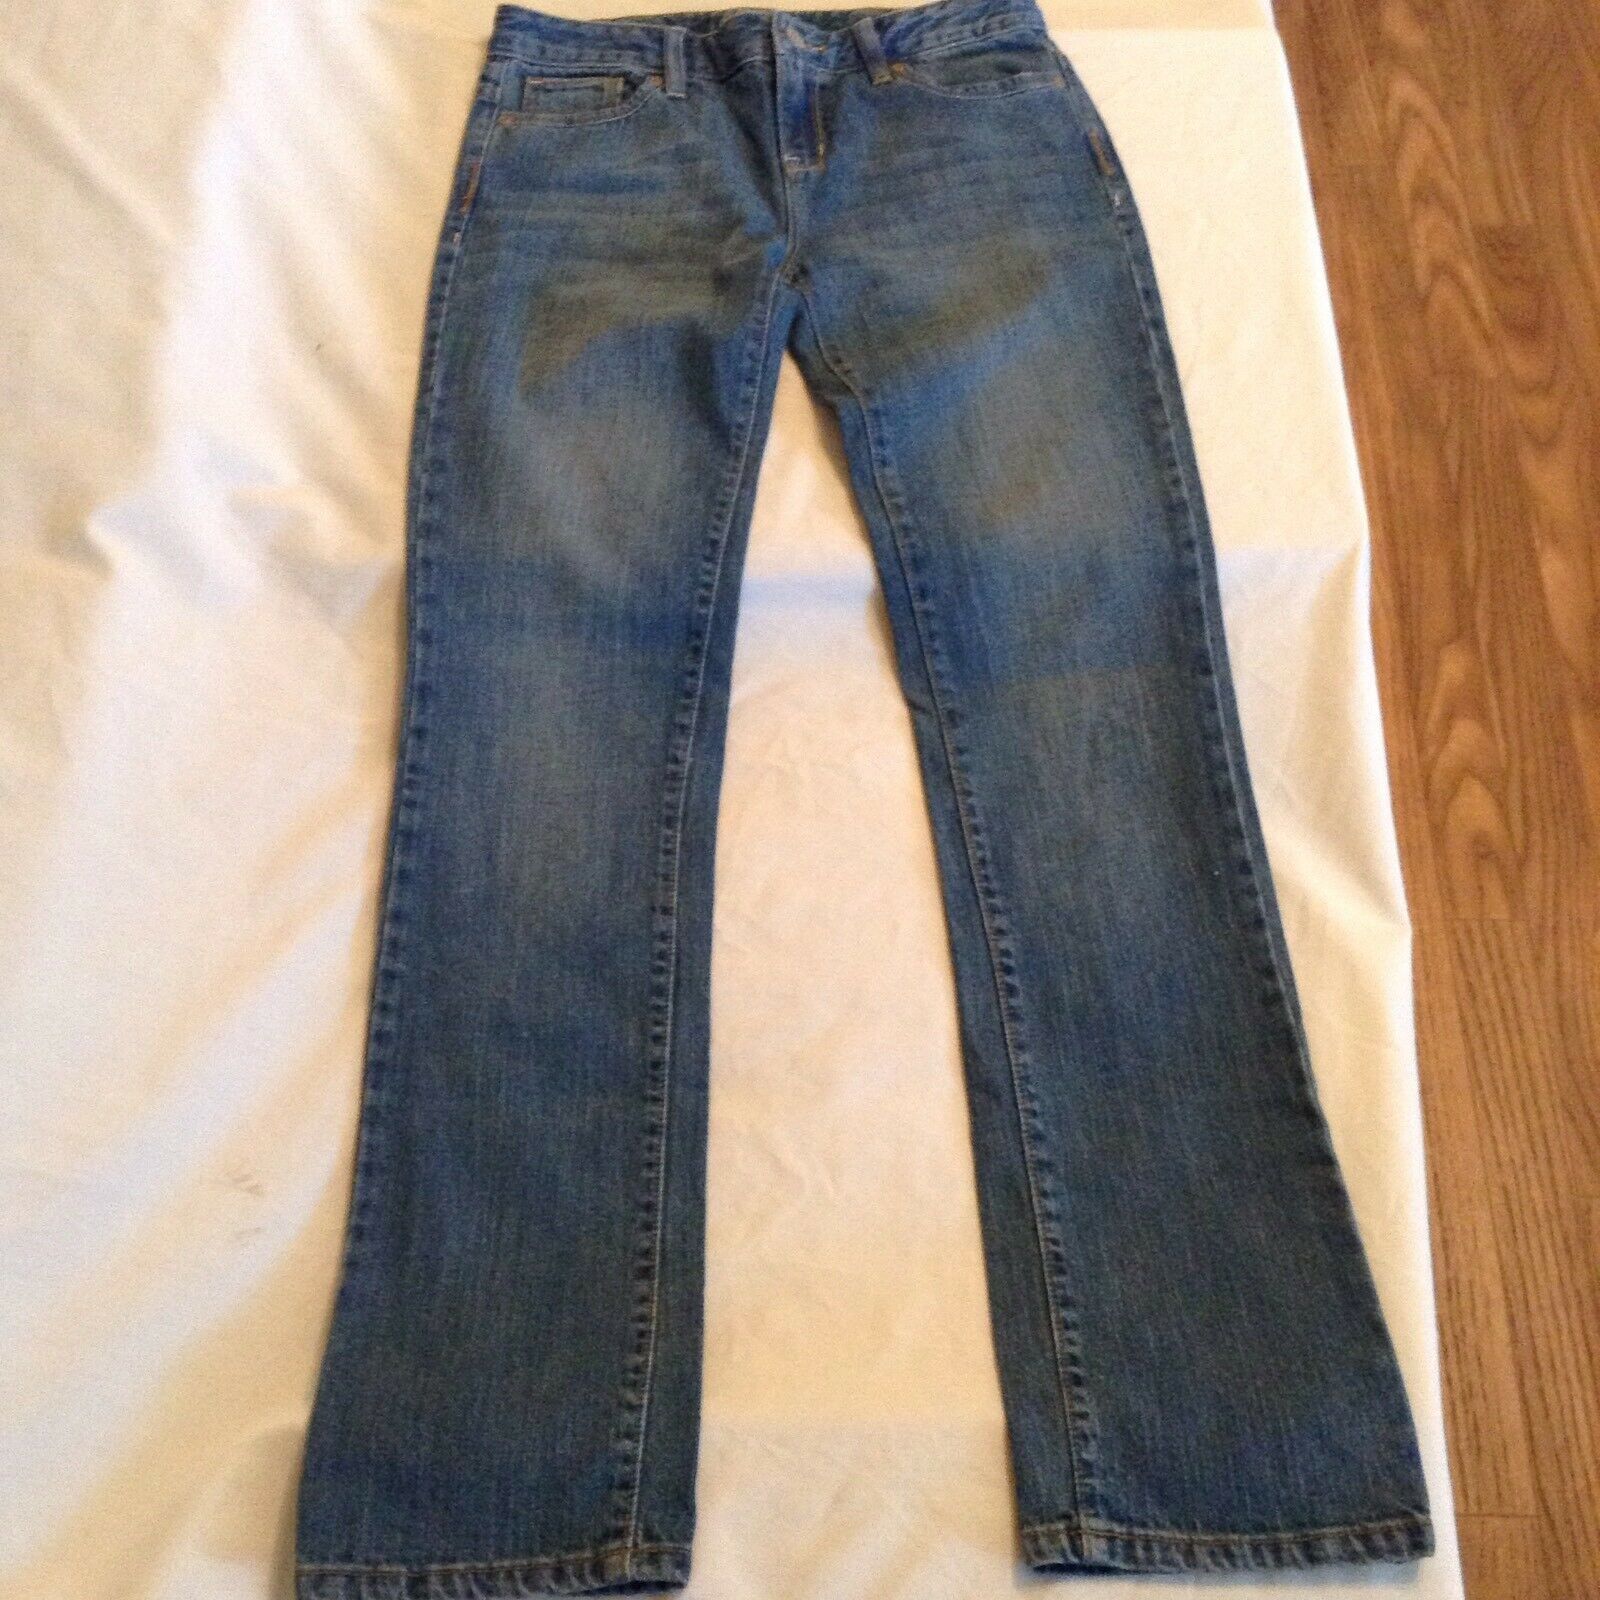 Primary image for Size 14 Regular Old Navy jeans skinny blue denim rodeo western Girls New